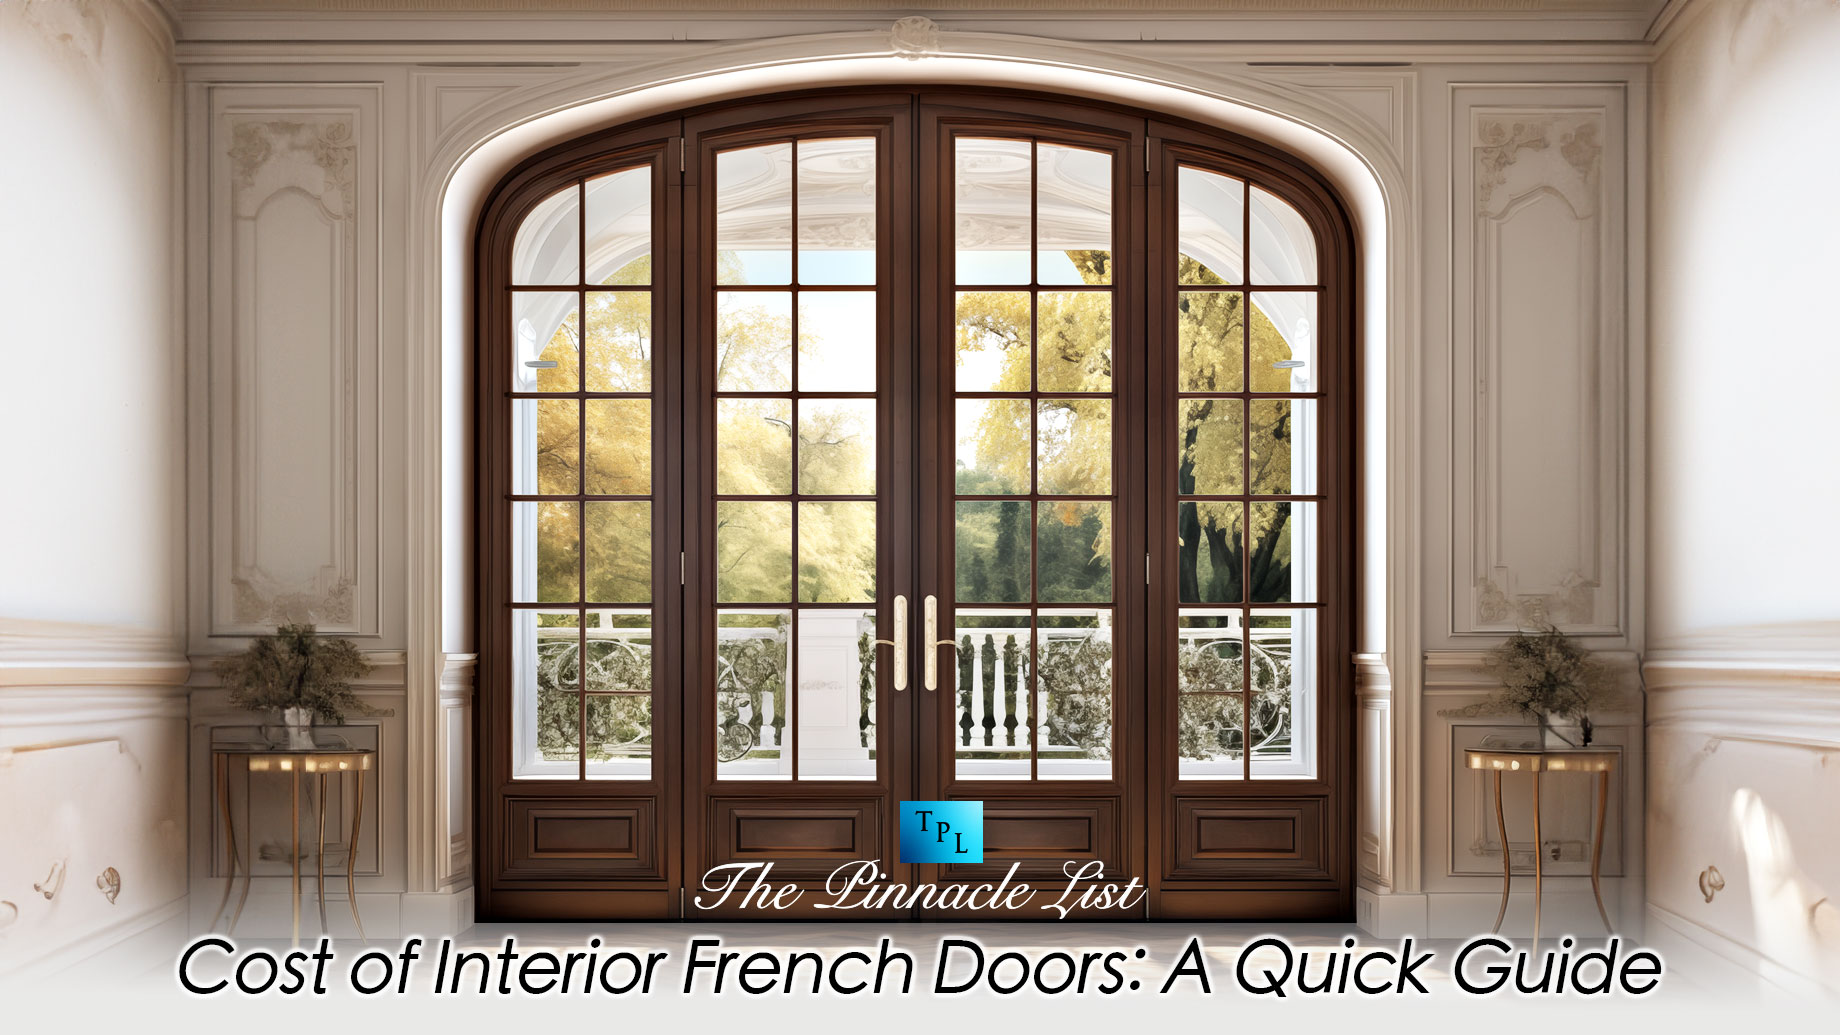 Cost of Interior French Doors: A Quick Guide